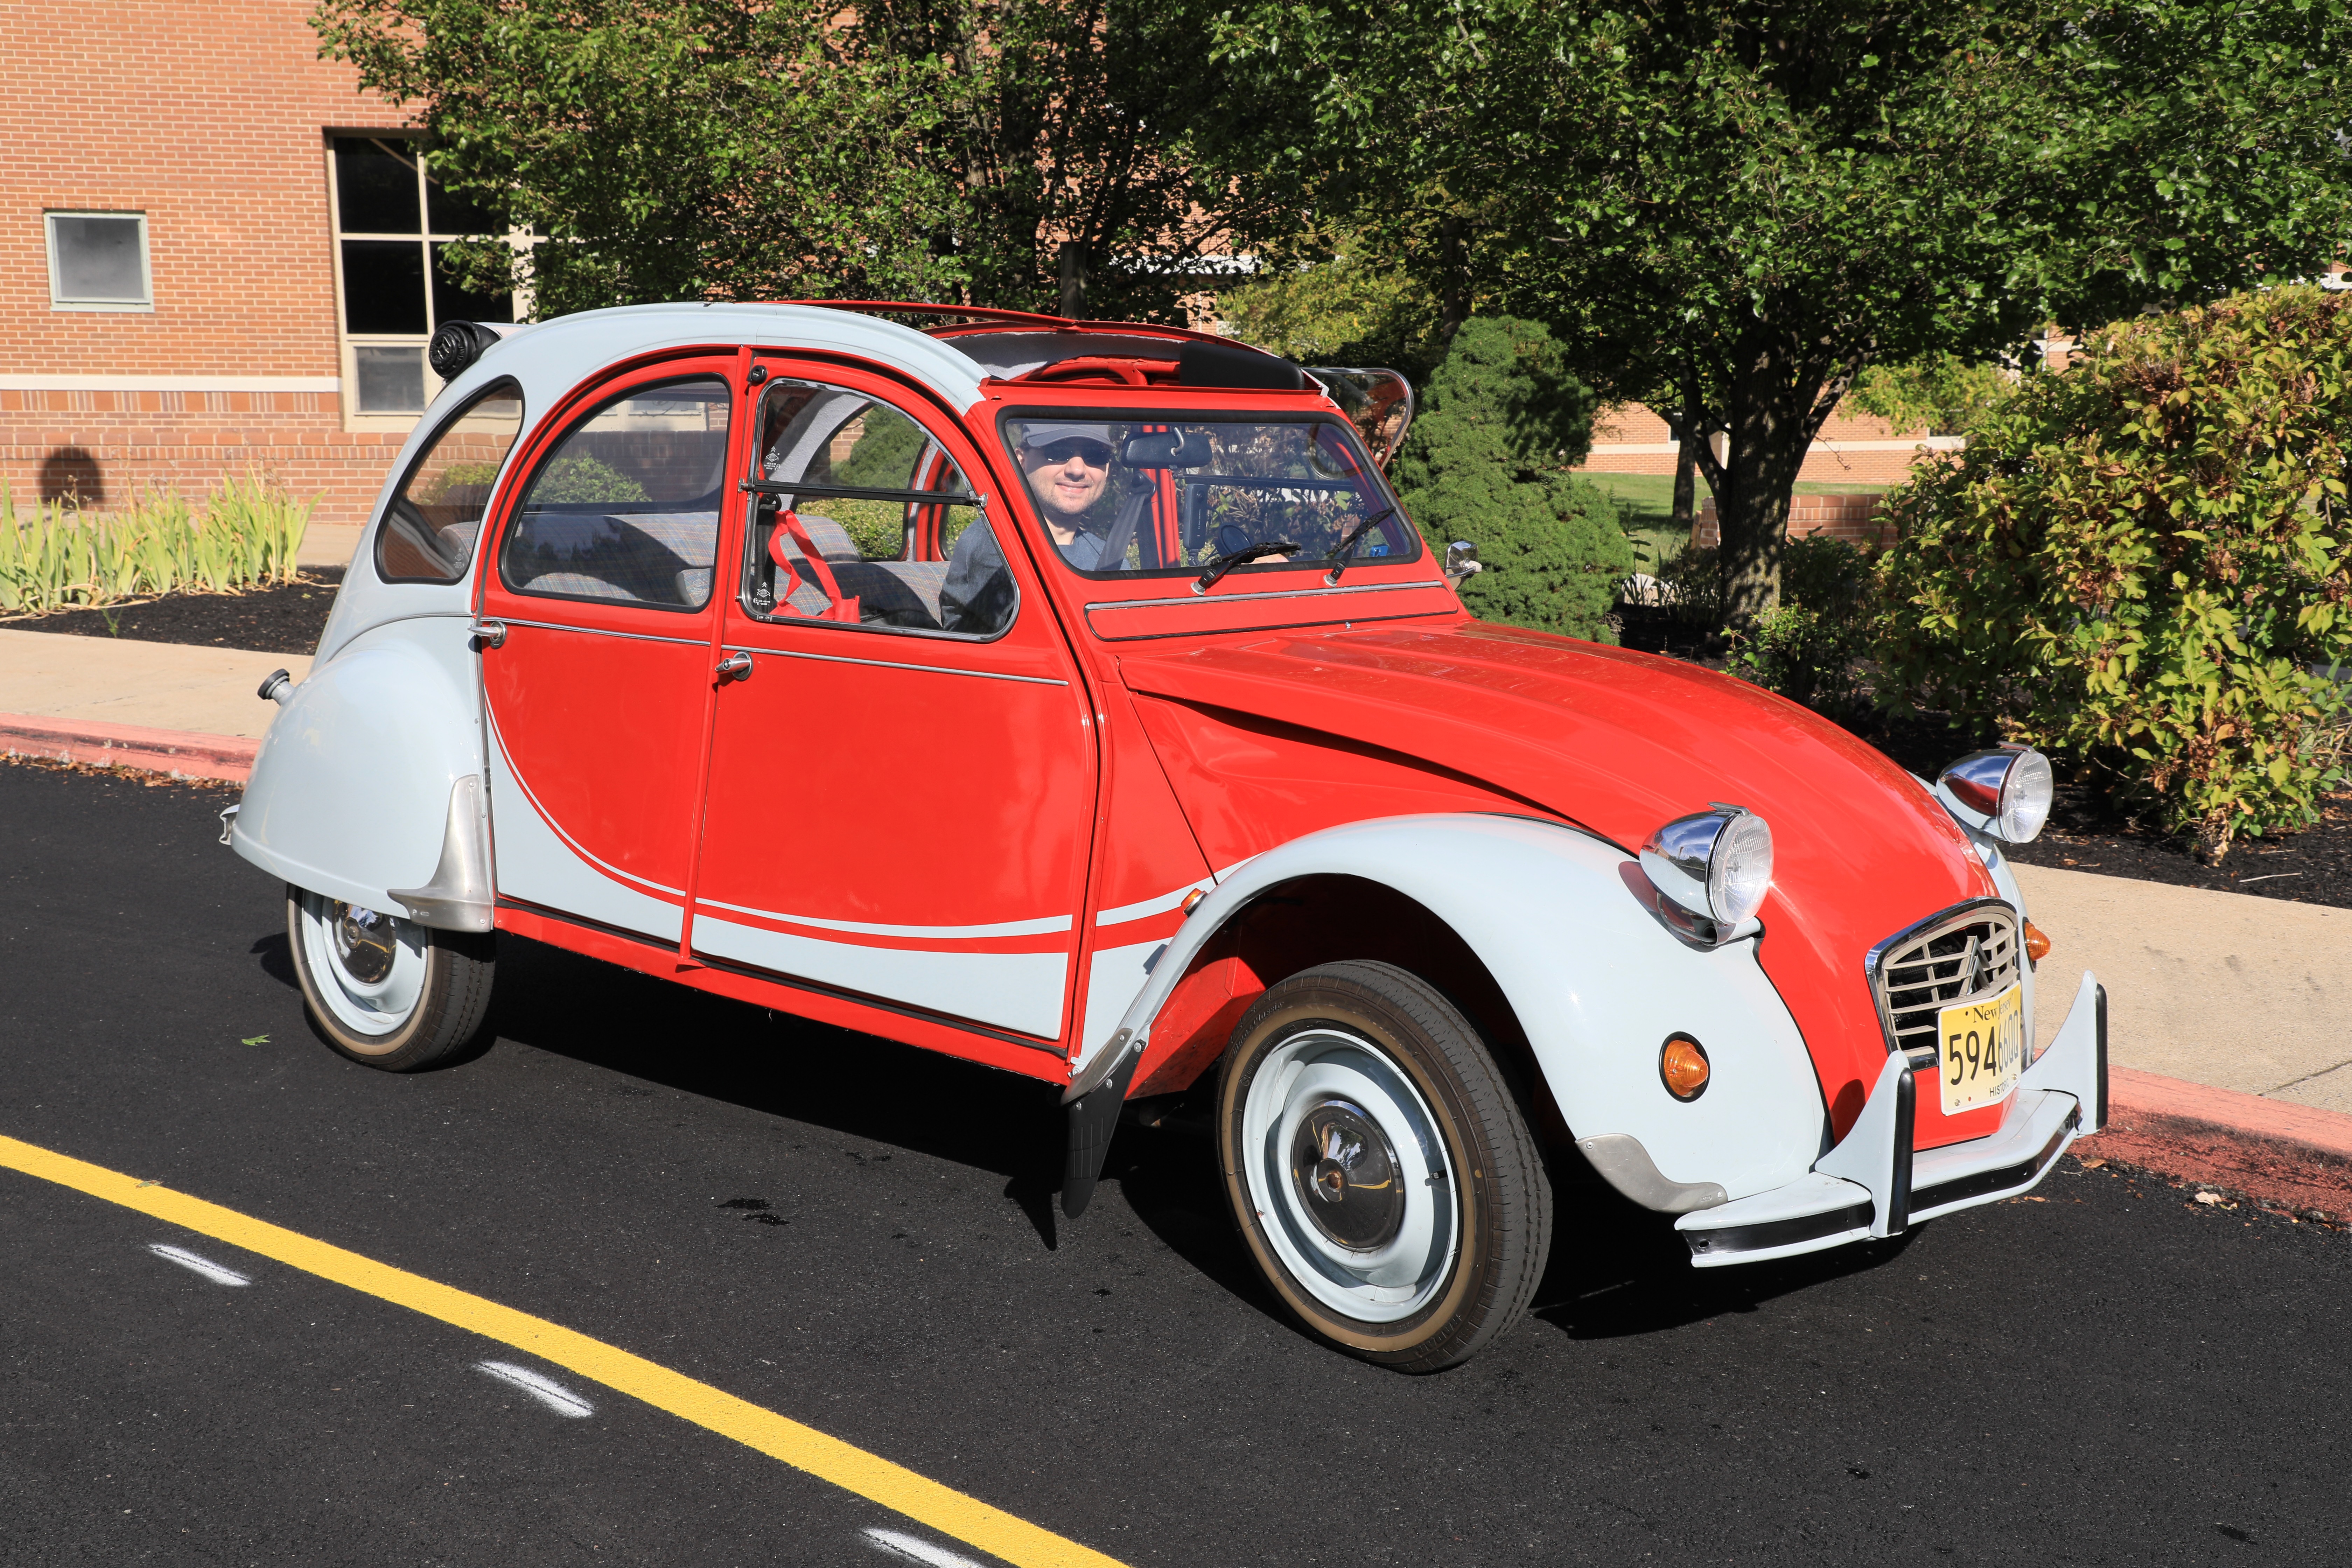 My 2CV at the 2022 New Hope Auto Show